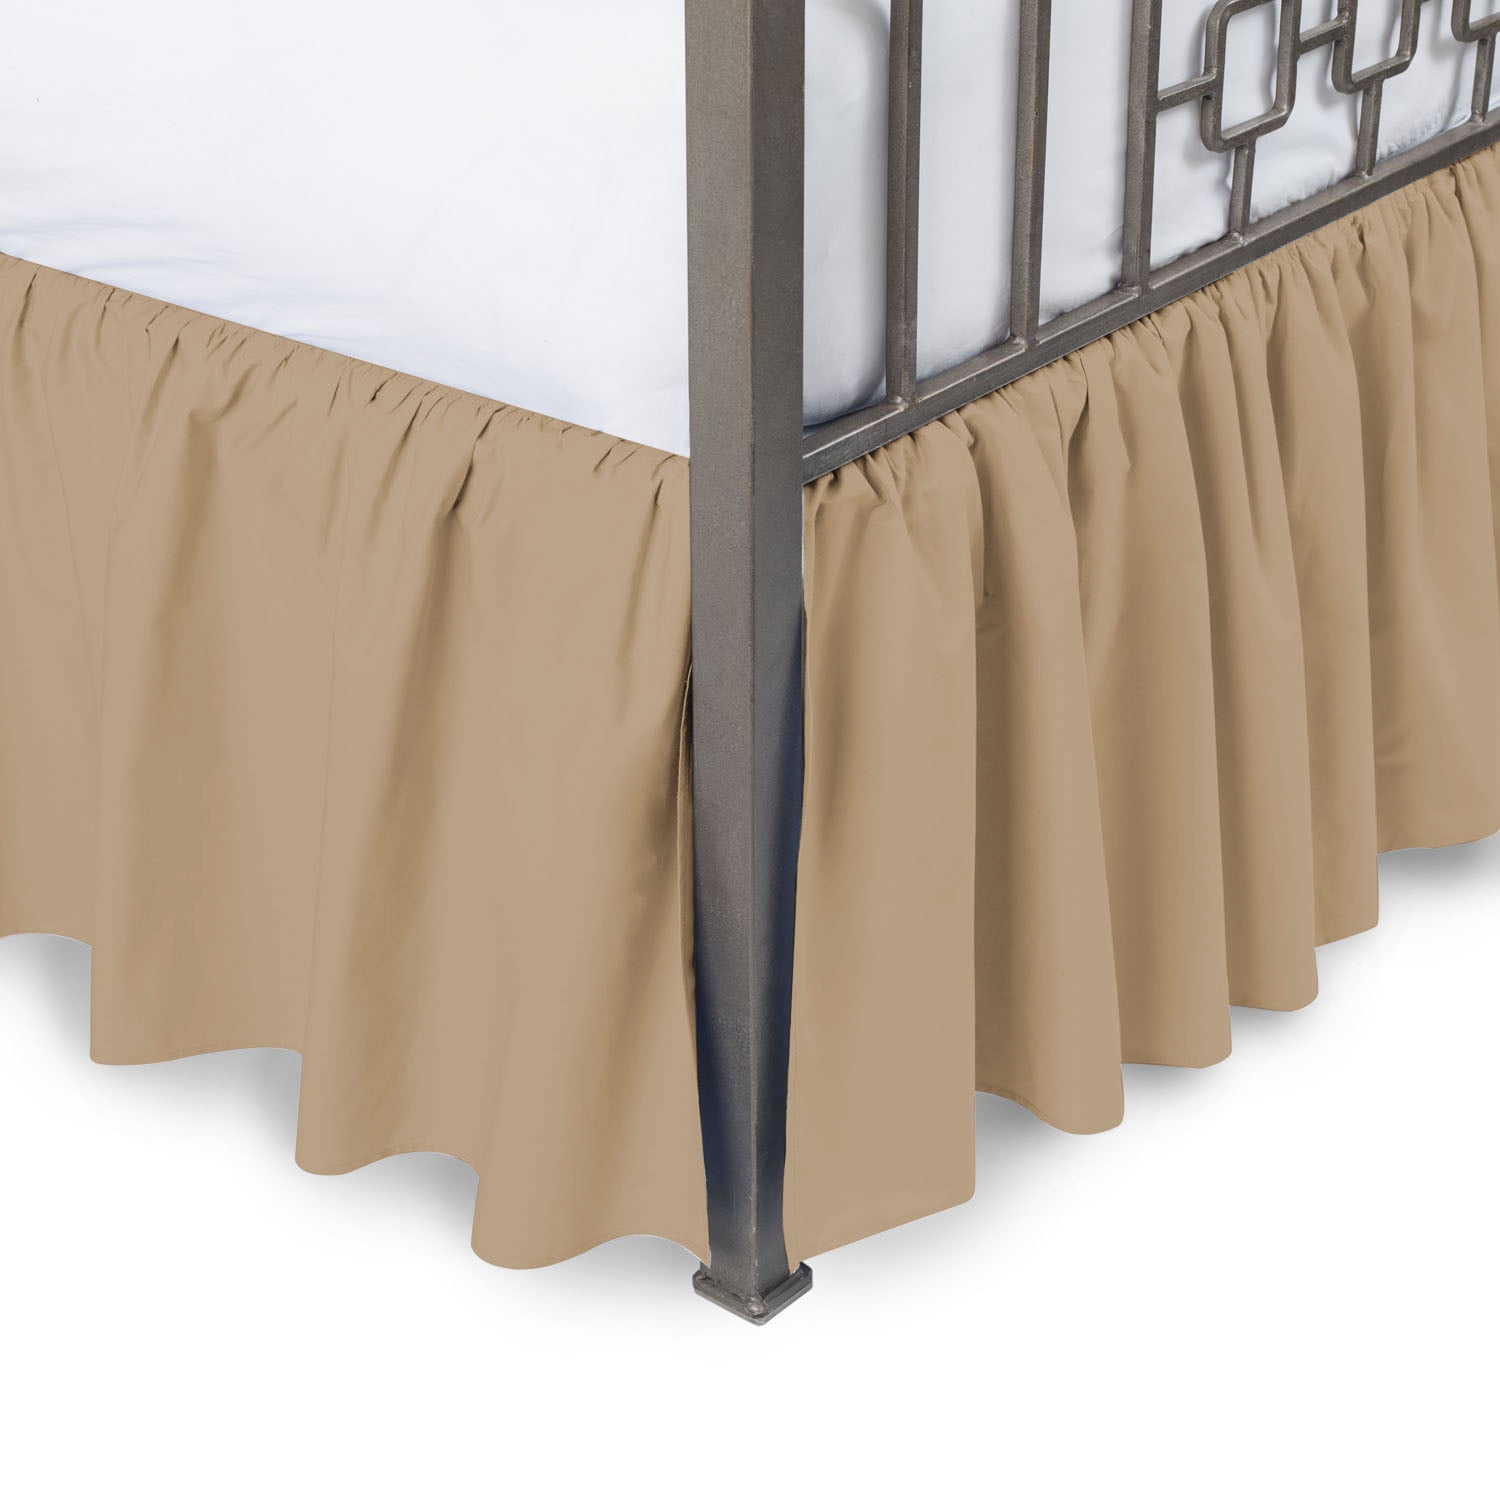 Cotton Metrics Linen 800TC Hotel Quality 100% Egyptian Cotton Bed Skirt 12 Drop Length King Size Taupe Solid 